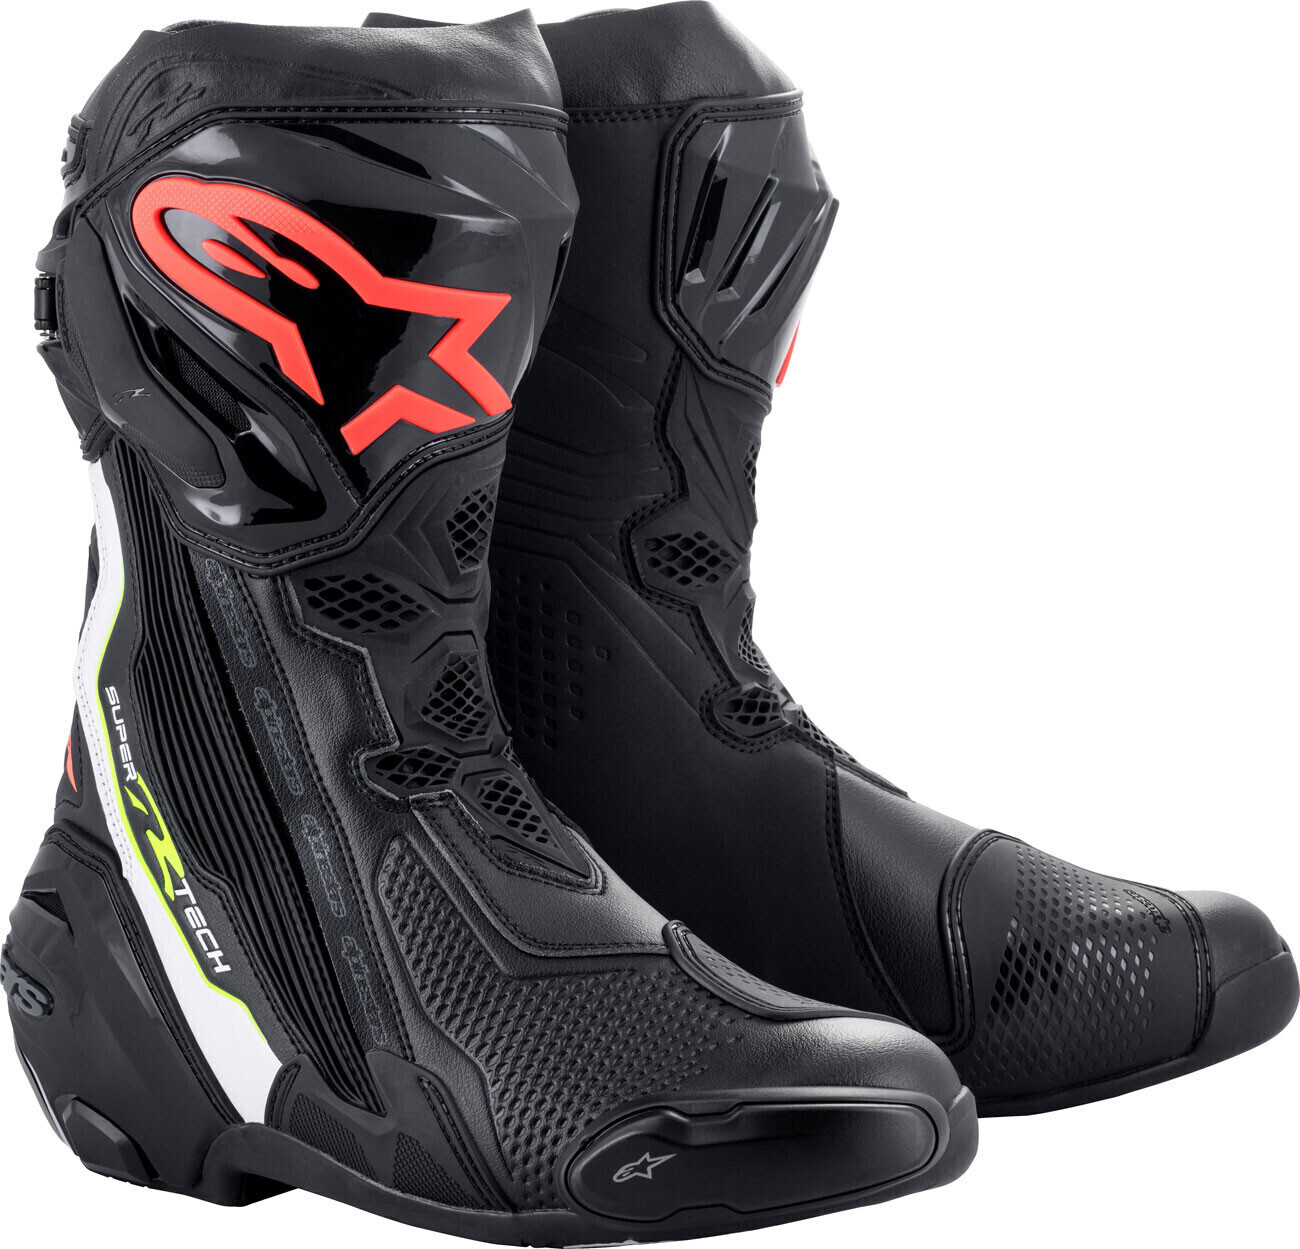 Photos - Motorcycle Boots Alpinestars Supertech R Boot black/red 